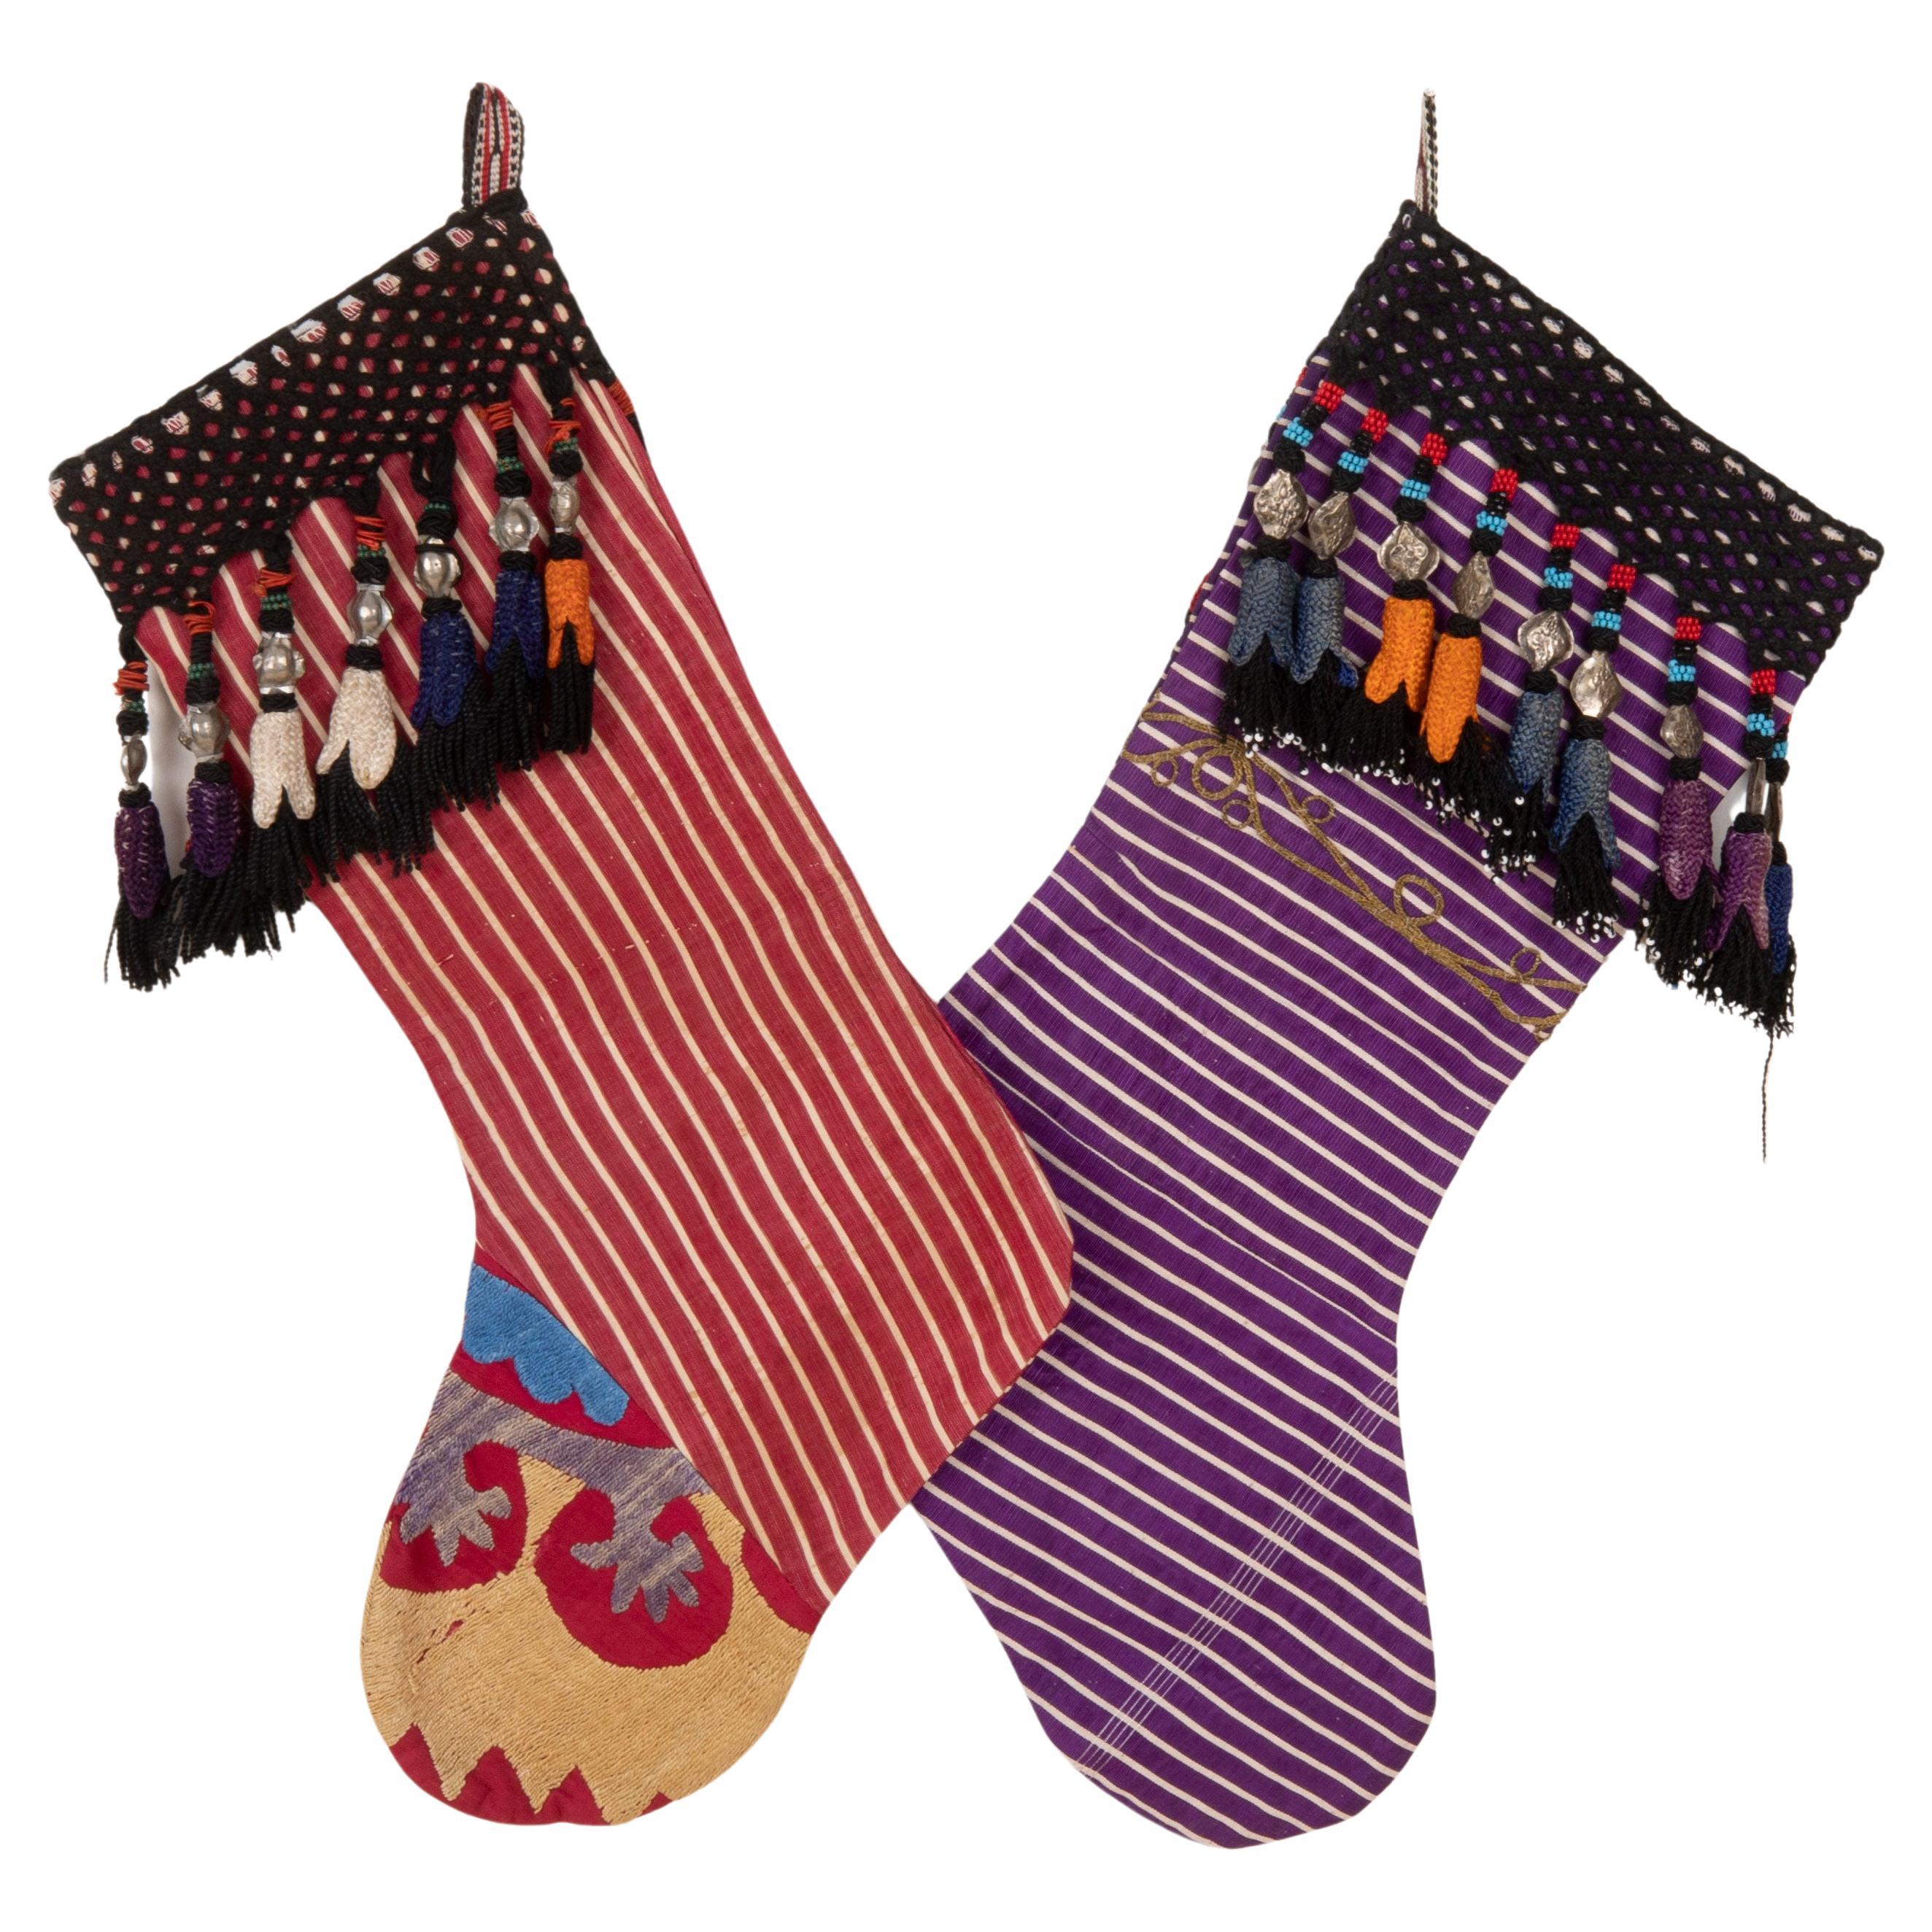 Double Sided Christmas Stockings Made from Vintage Turkish and Uzbek Textile Fra For Sale